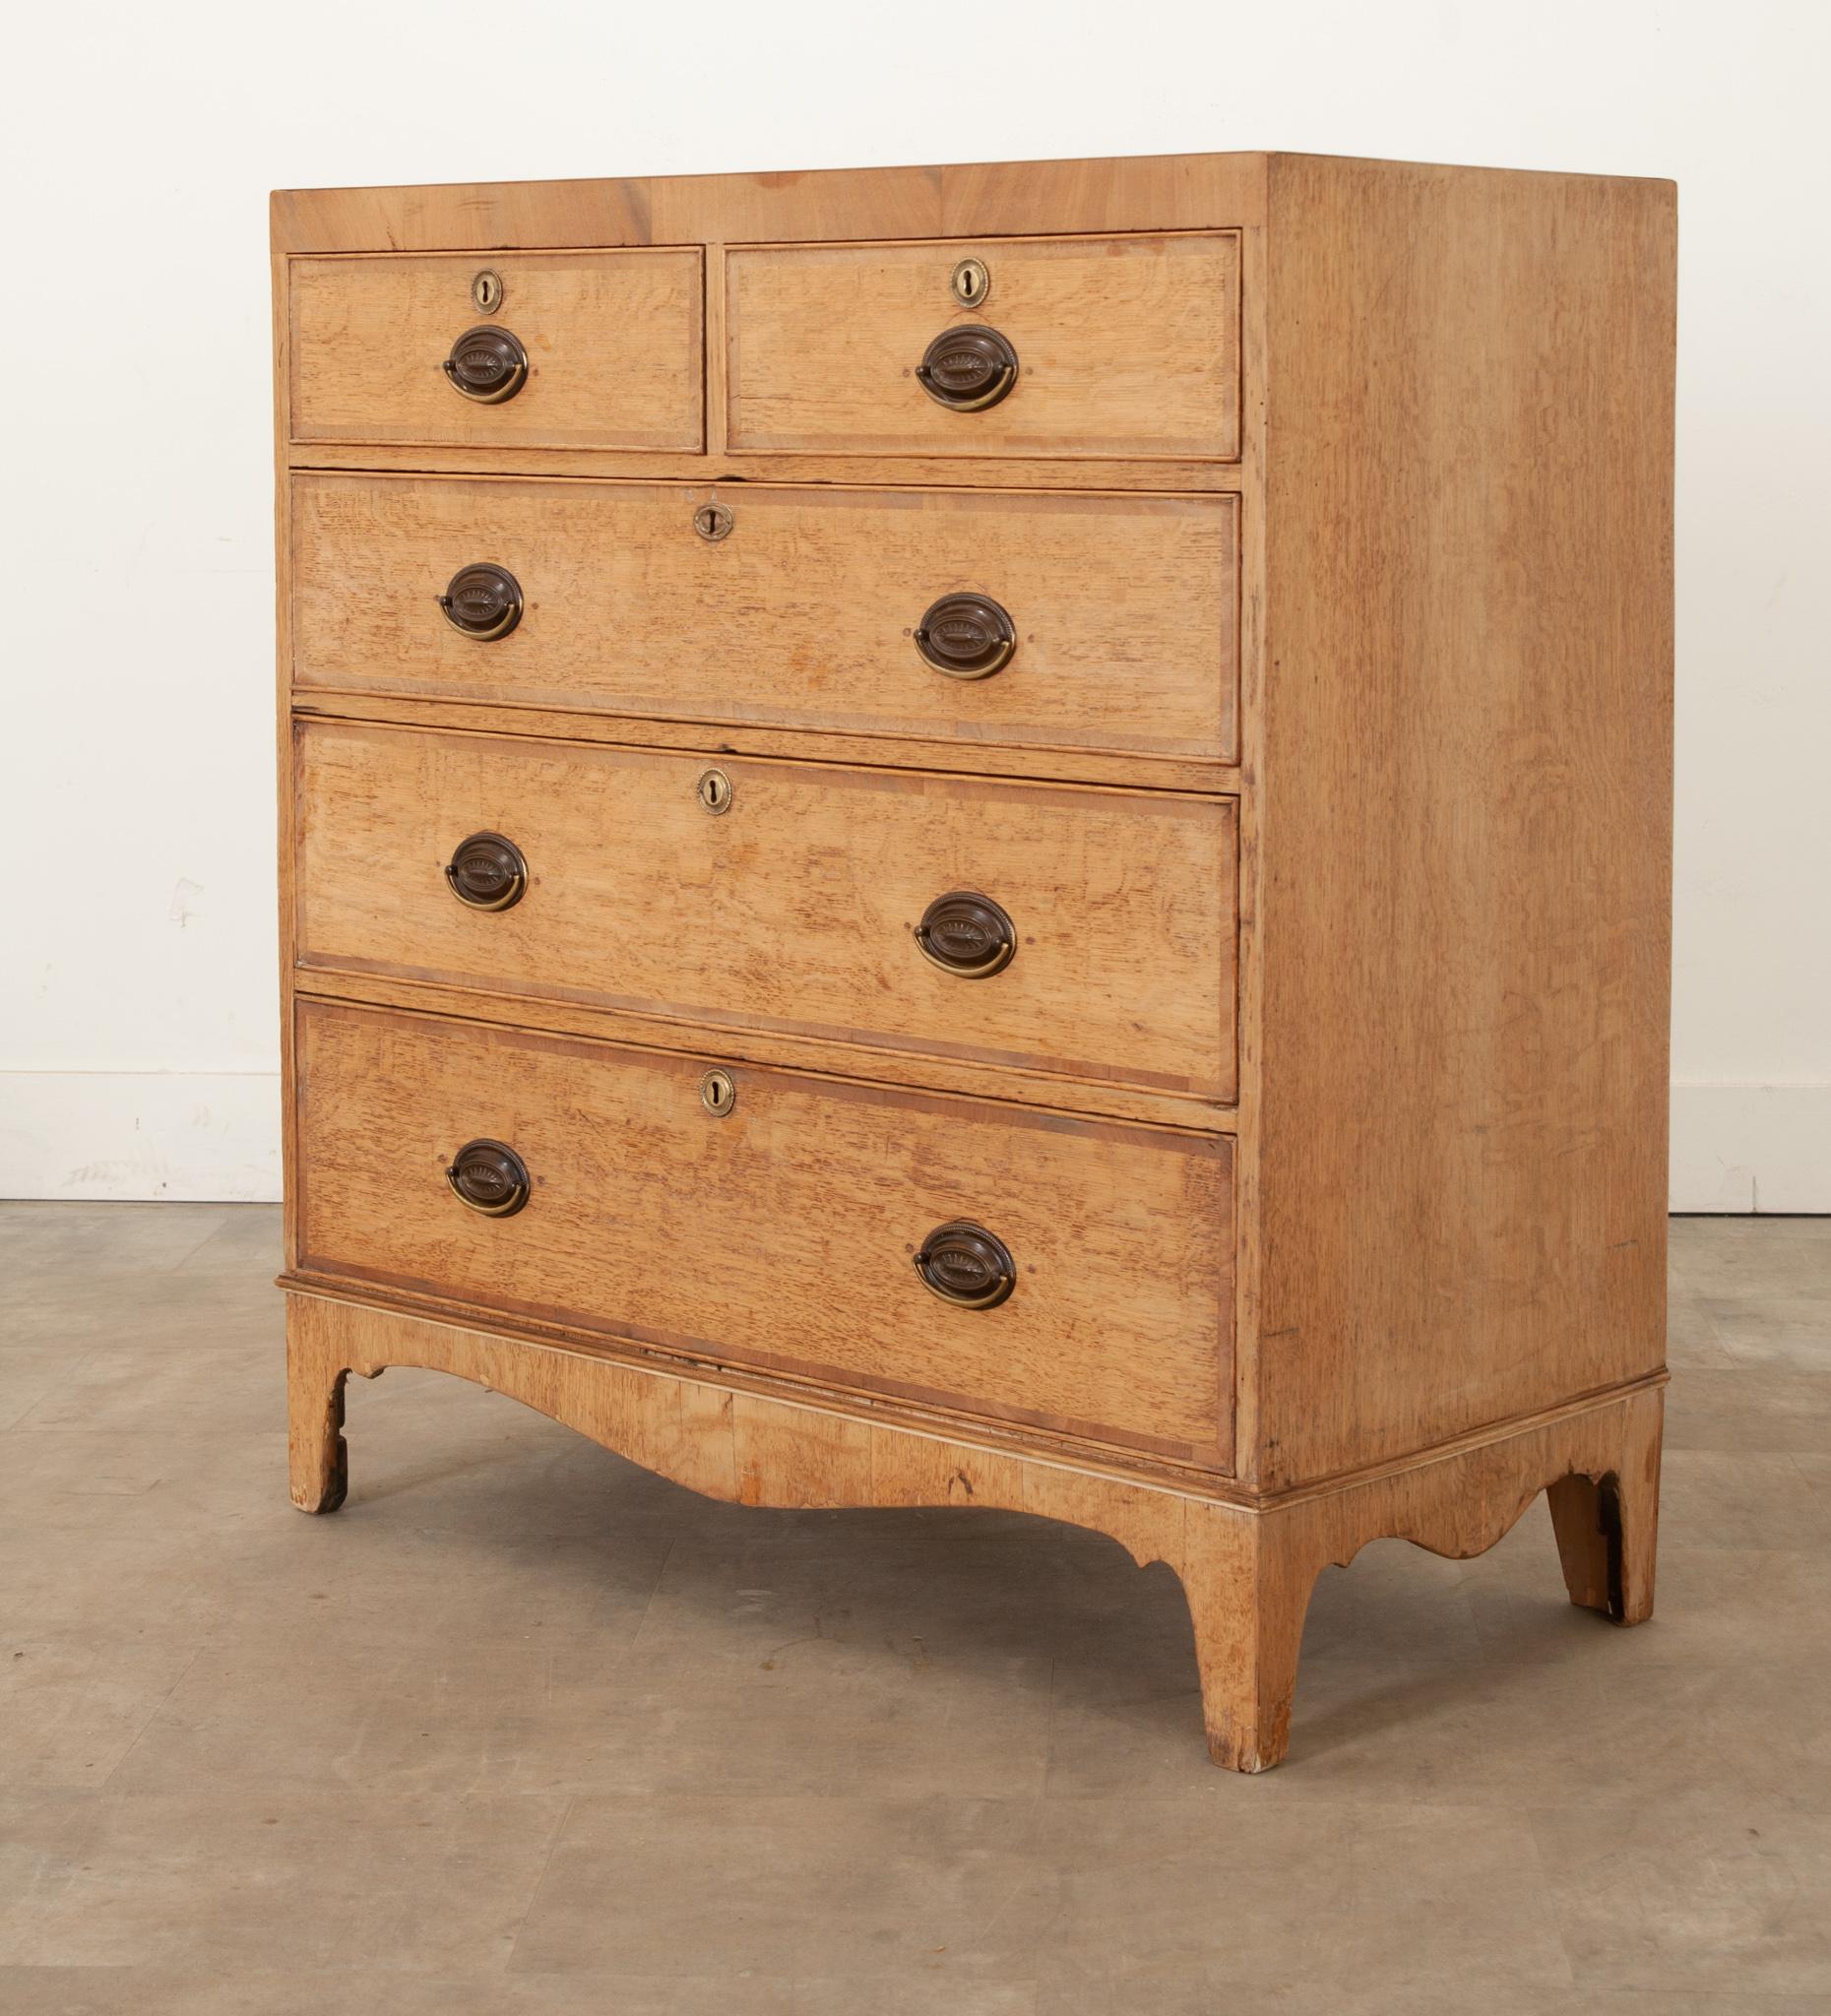 A functional little chest of drawers that has a real elegance and a good quality of construction. Made in England circa 1840, it features five roomy drawers that provide ample storage space. The original brass drawer pulls and escutcheon plates